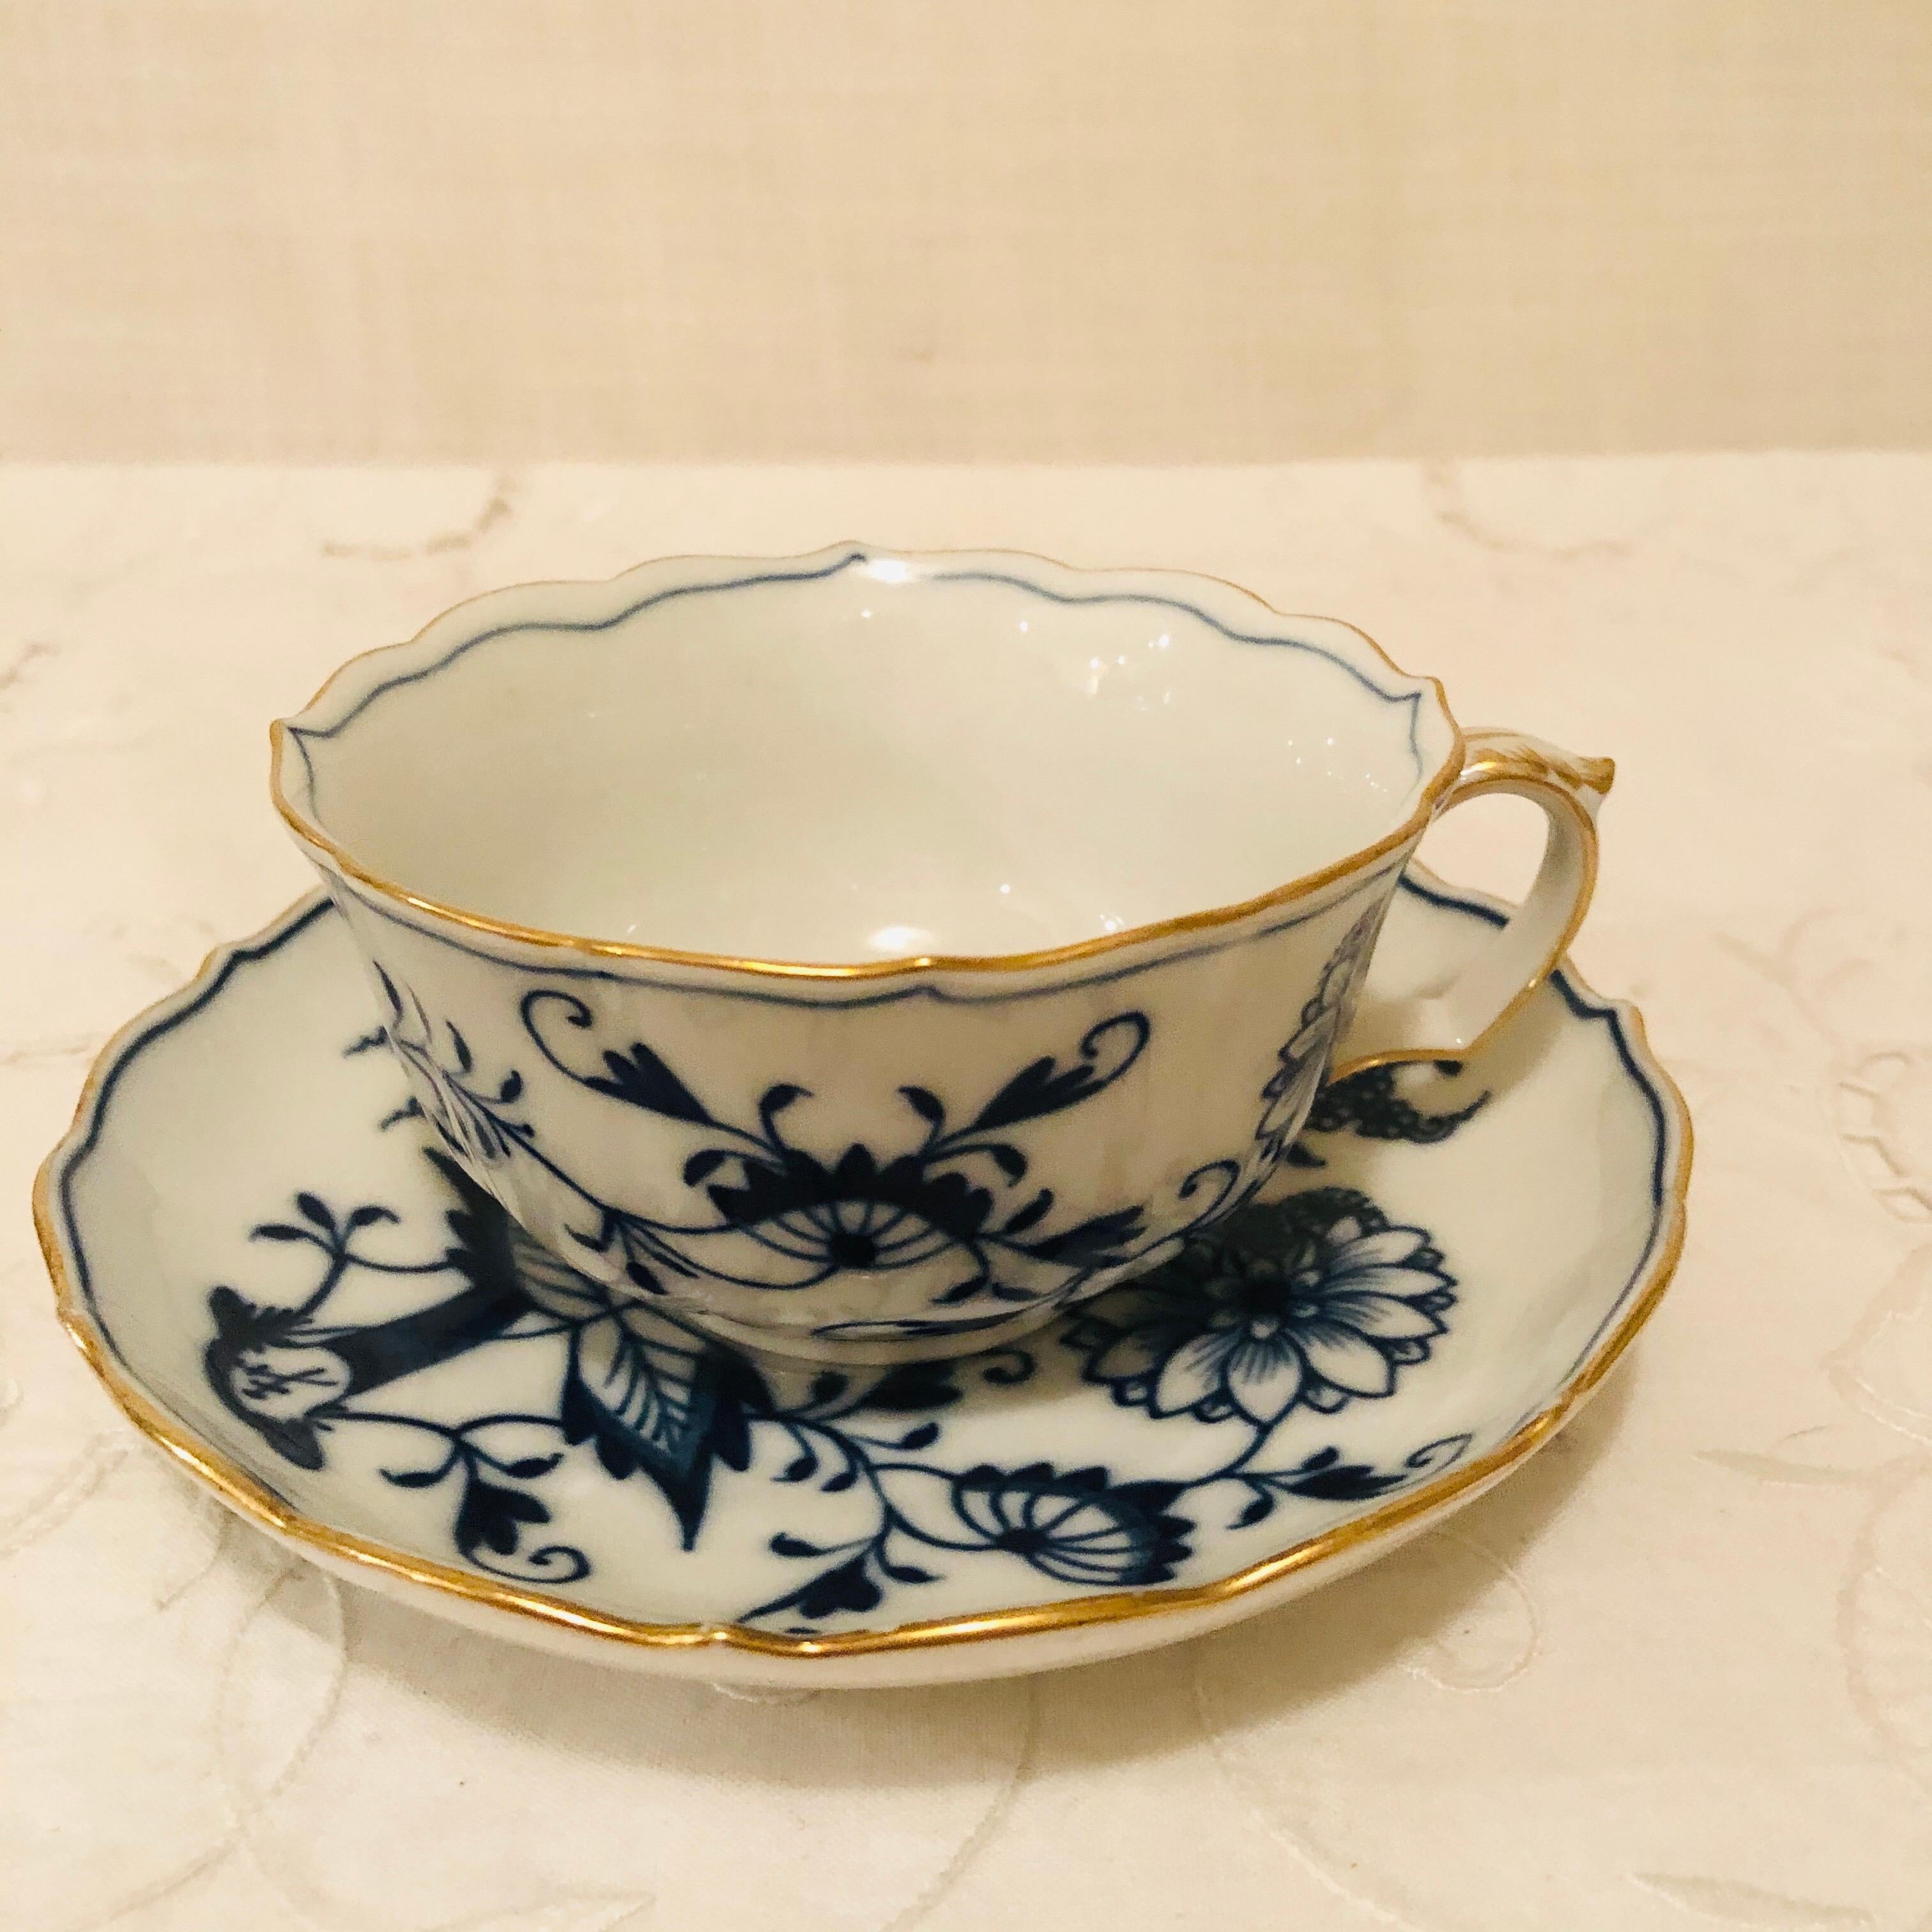 Hand-Painted Set of 12 Meissen Blue Onion Teacups and Saucers with a Gold Rim